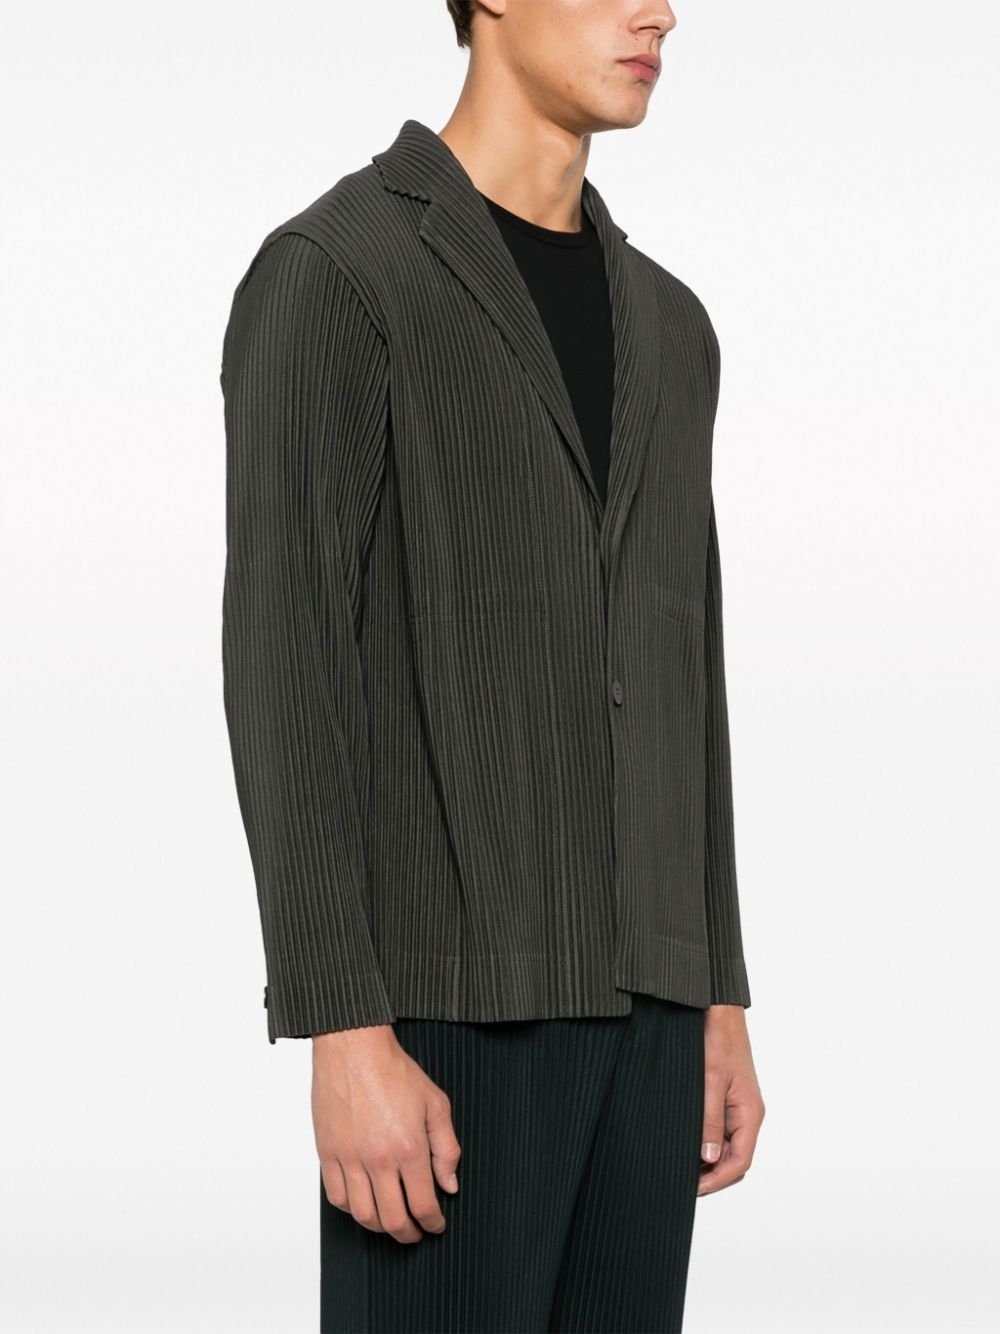 HOMME PLISSÉ ISSEY MIYAKE-TAILORED PLEATS 1-HP38JD150 65